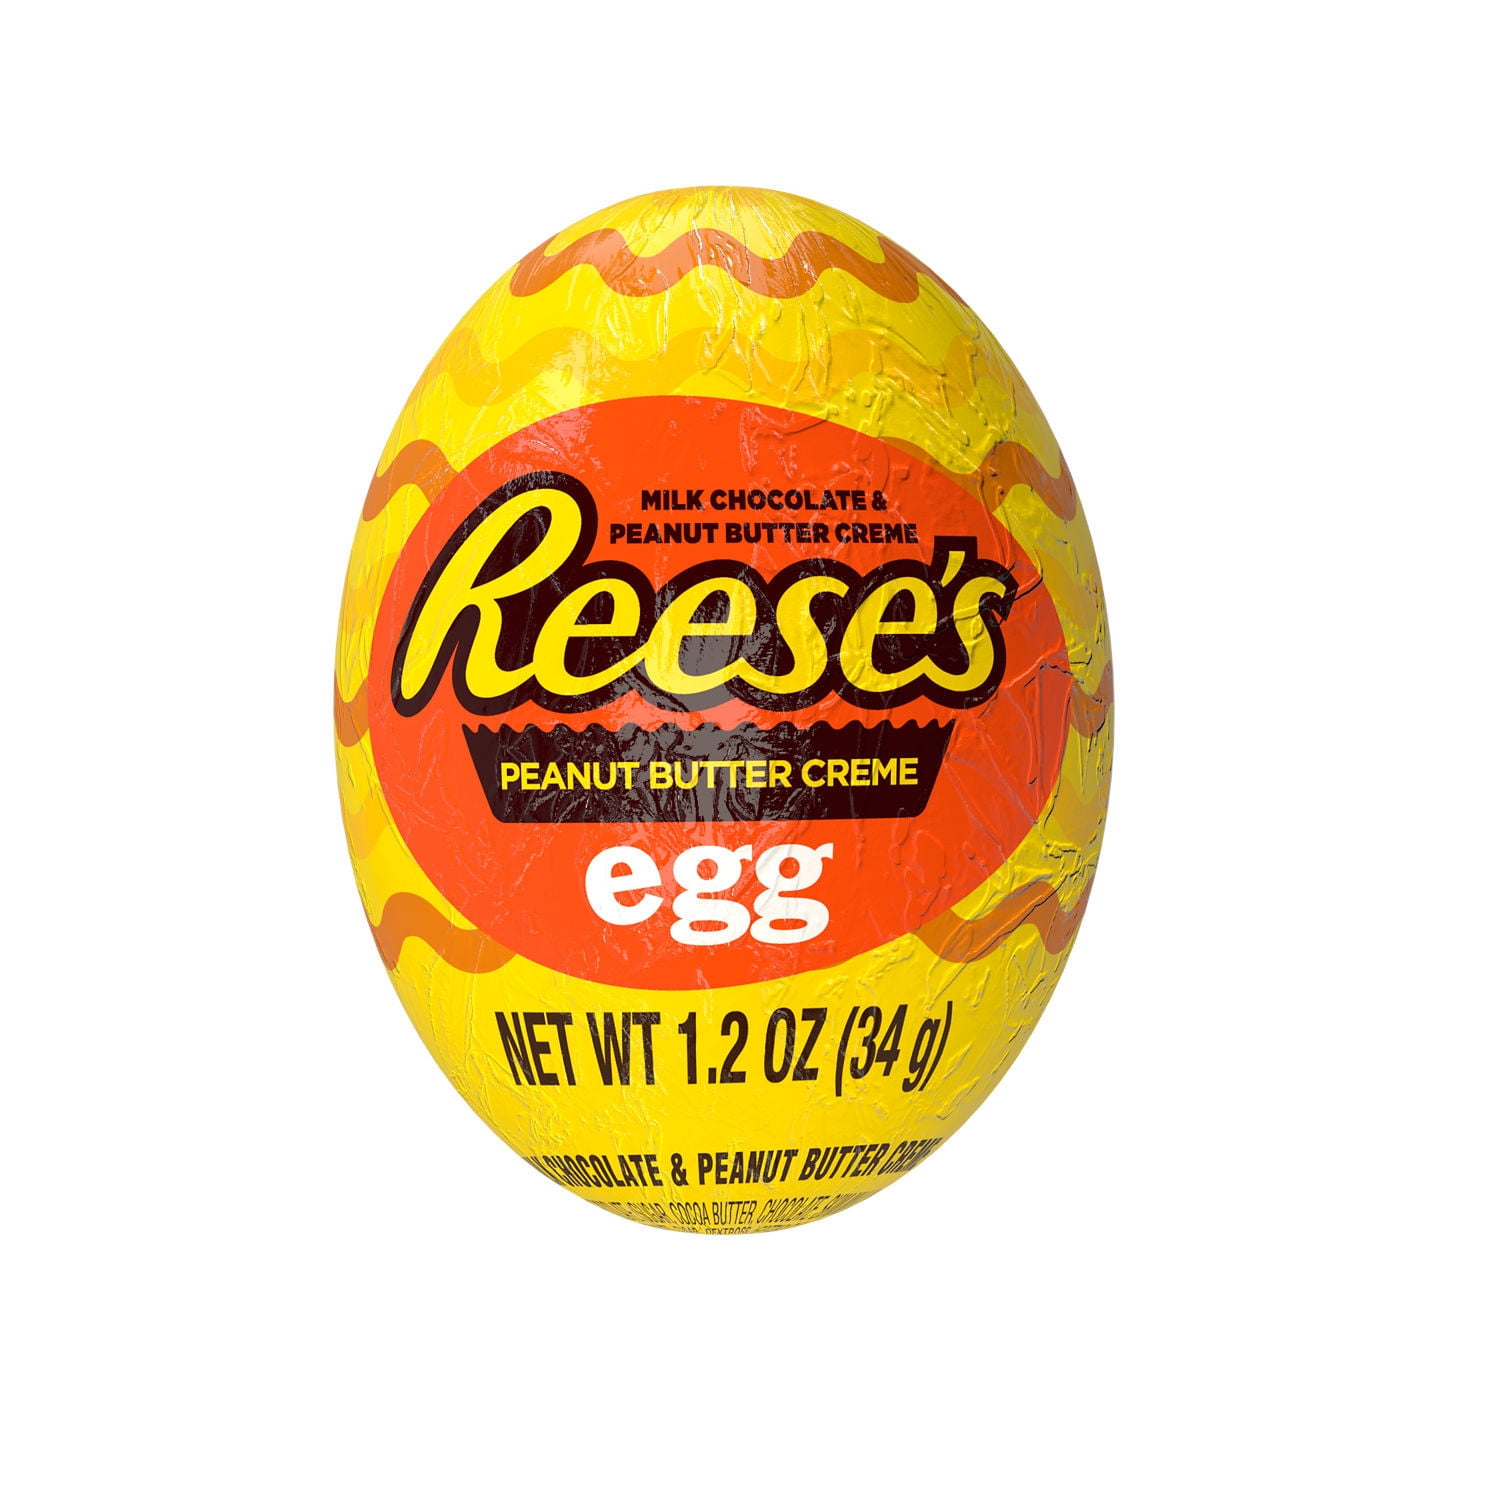 REESE'S Milk Chocolate Peanut Butter Creme, Easter Candy Egg, 1.2 oz